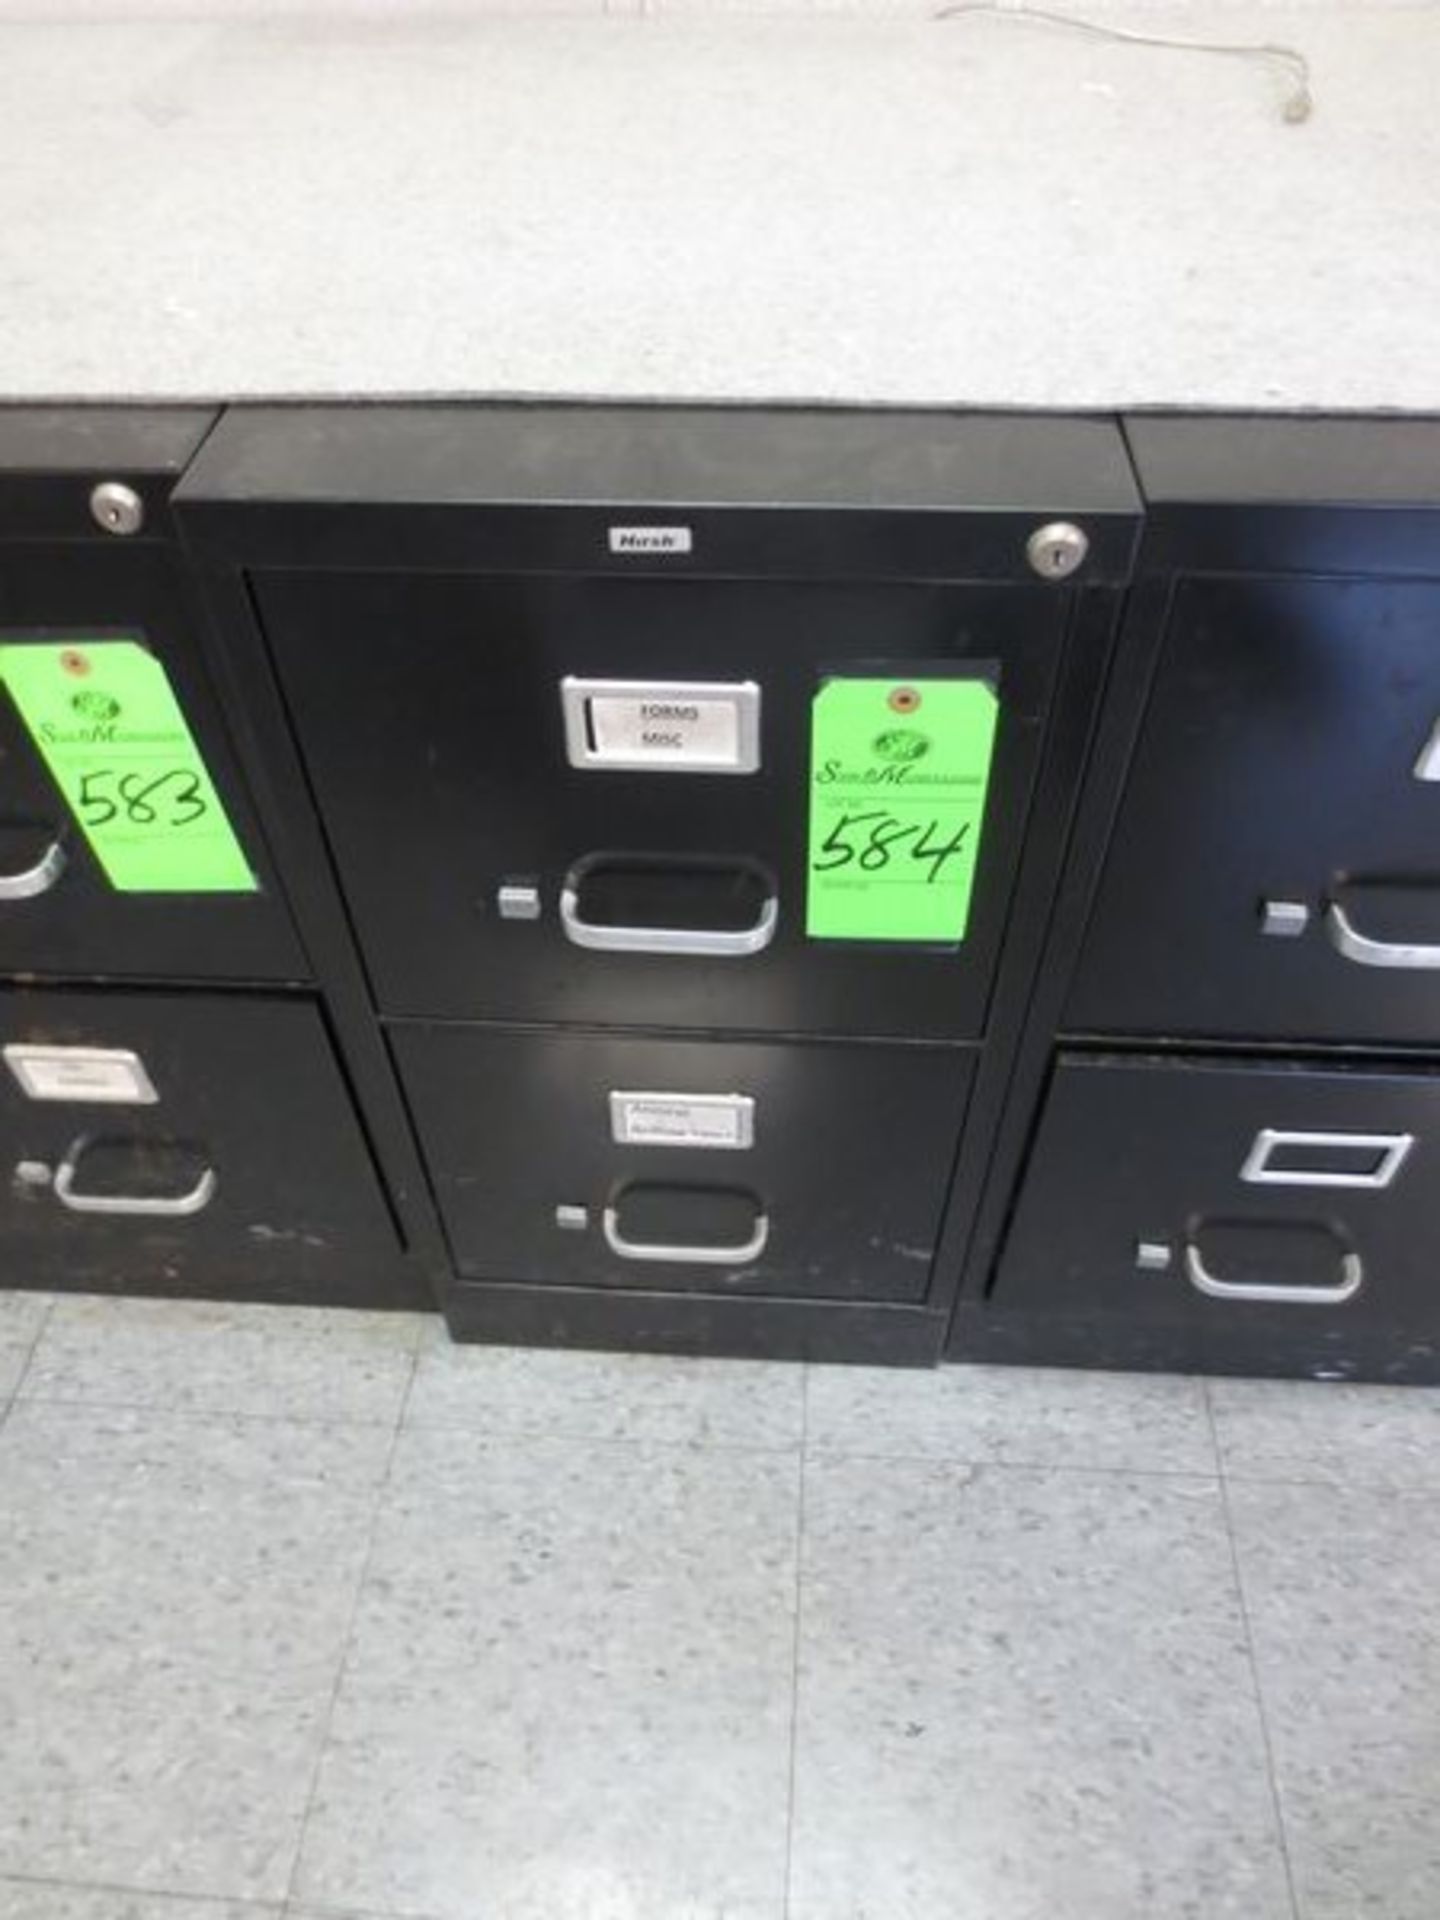 File Cabinet - Image 2 of 2